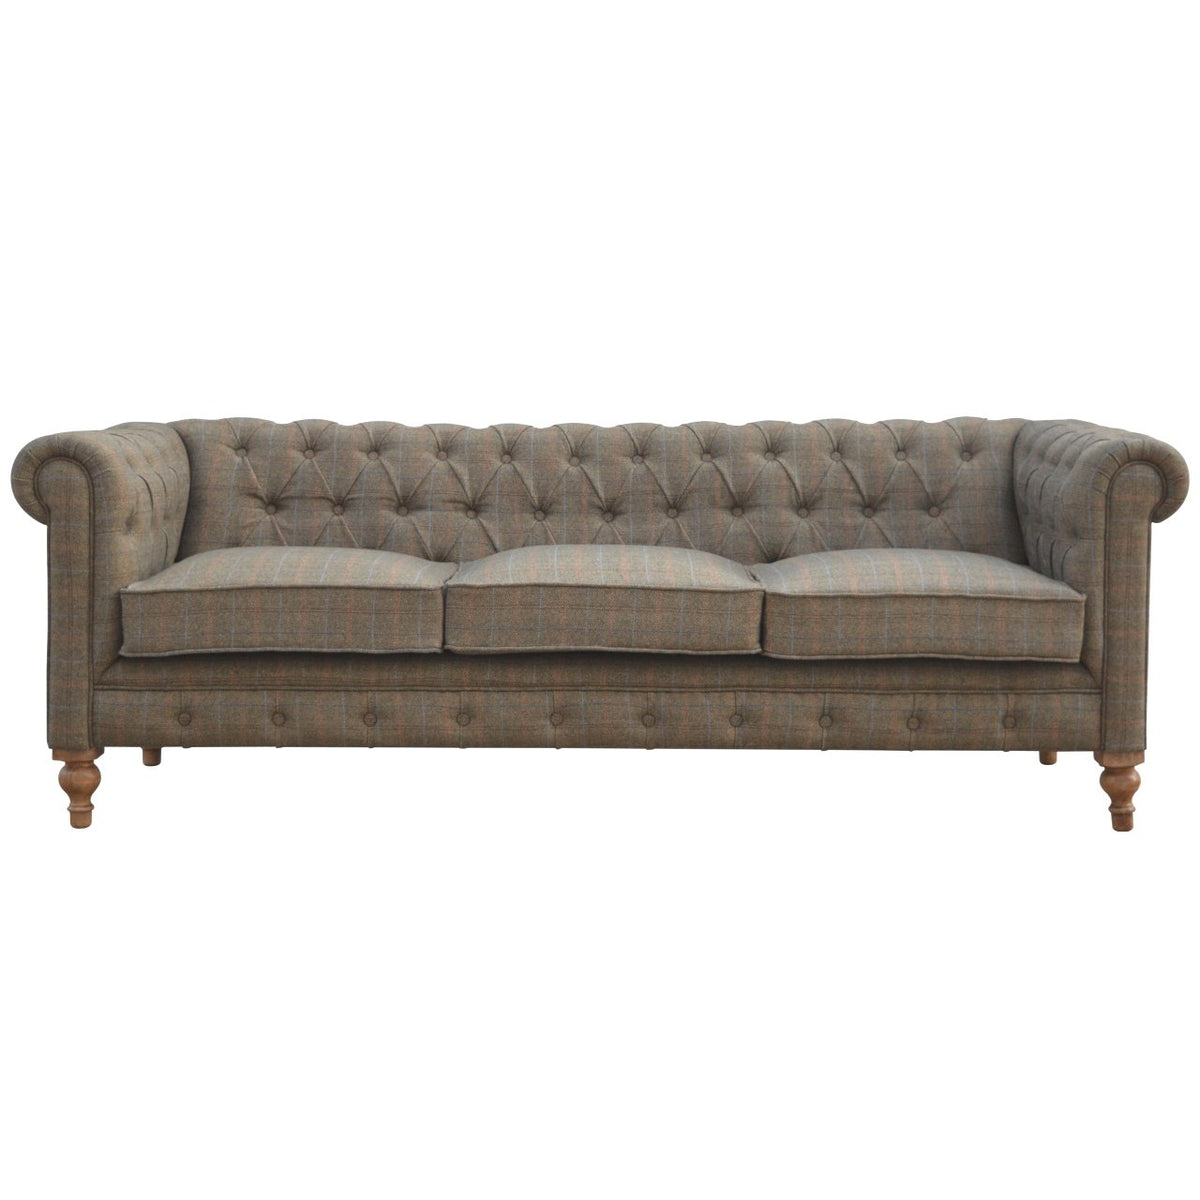 Handcrafted Solid Wood Multi Tweed 3 Seater Sofa - HM_FURNITURE